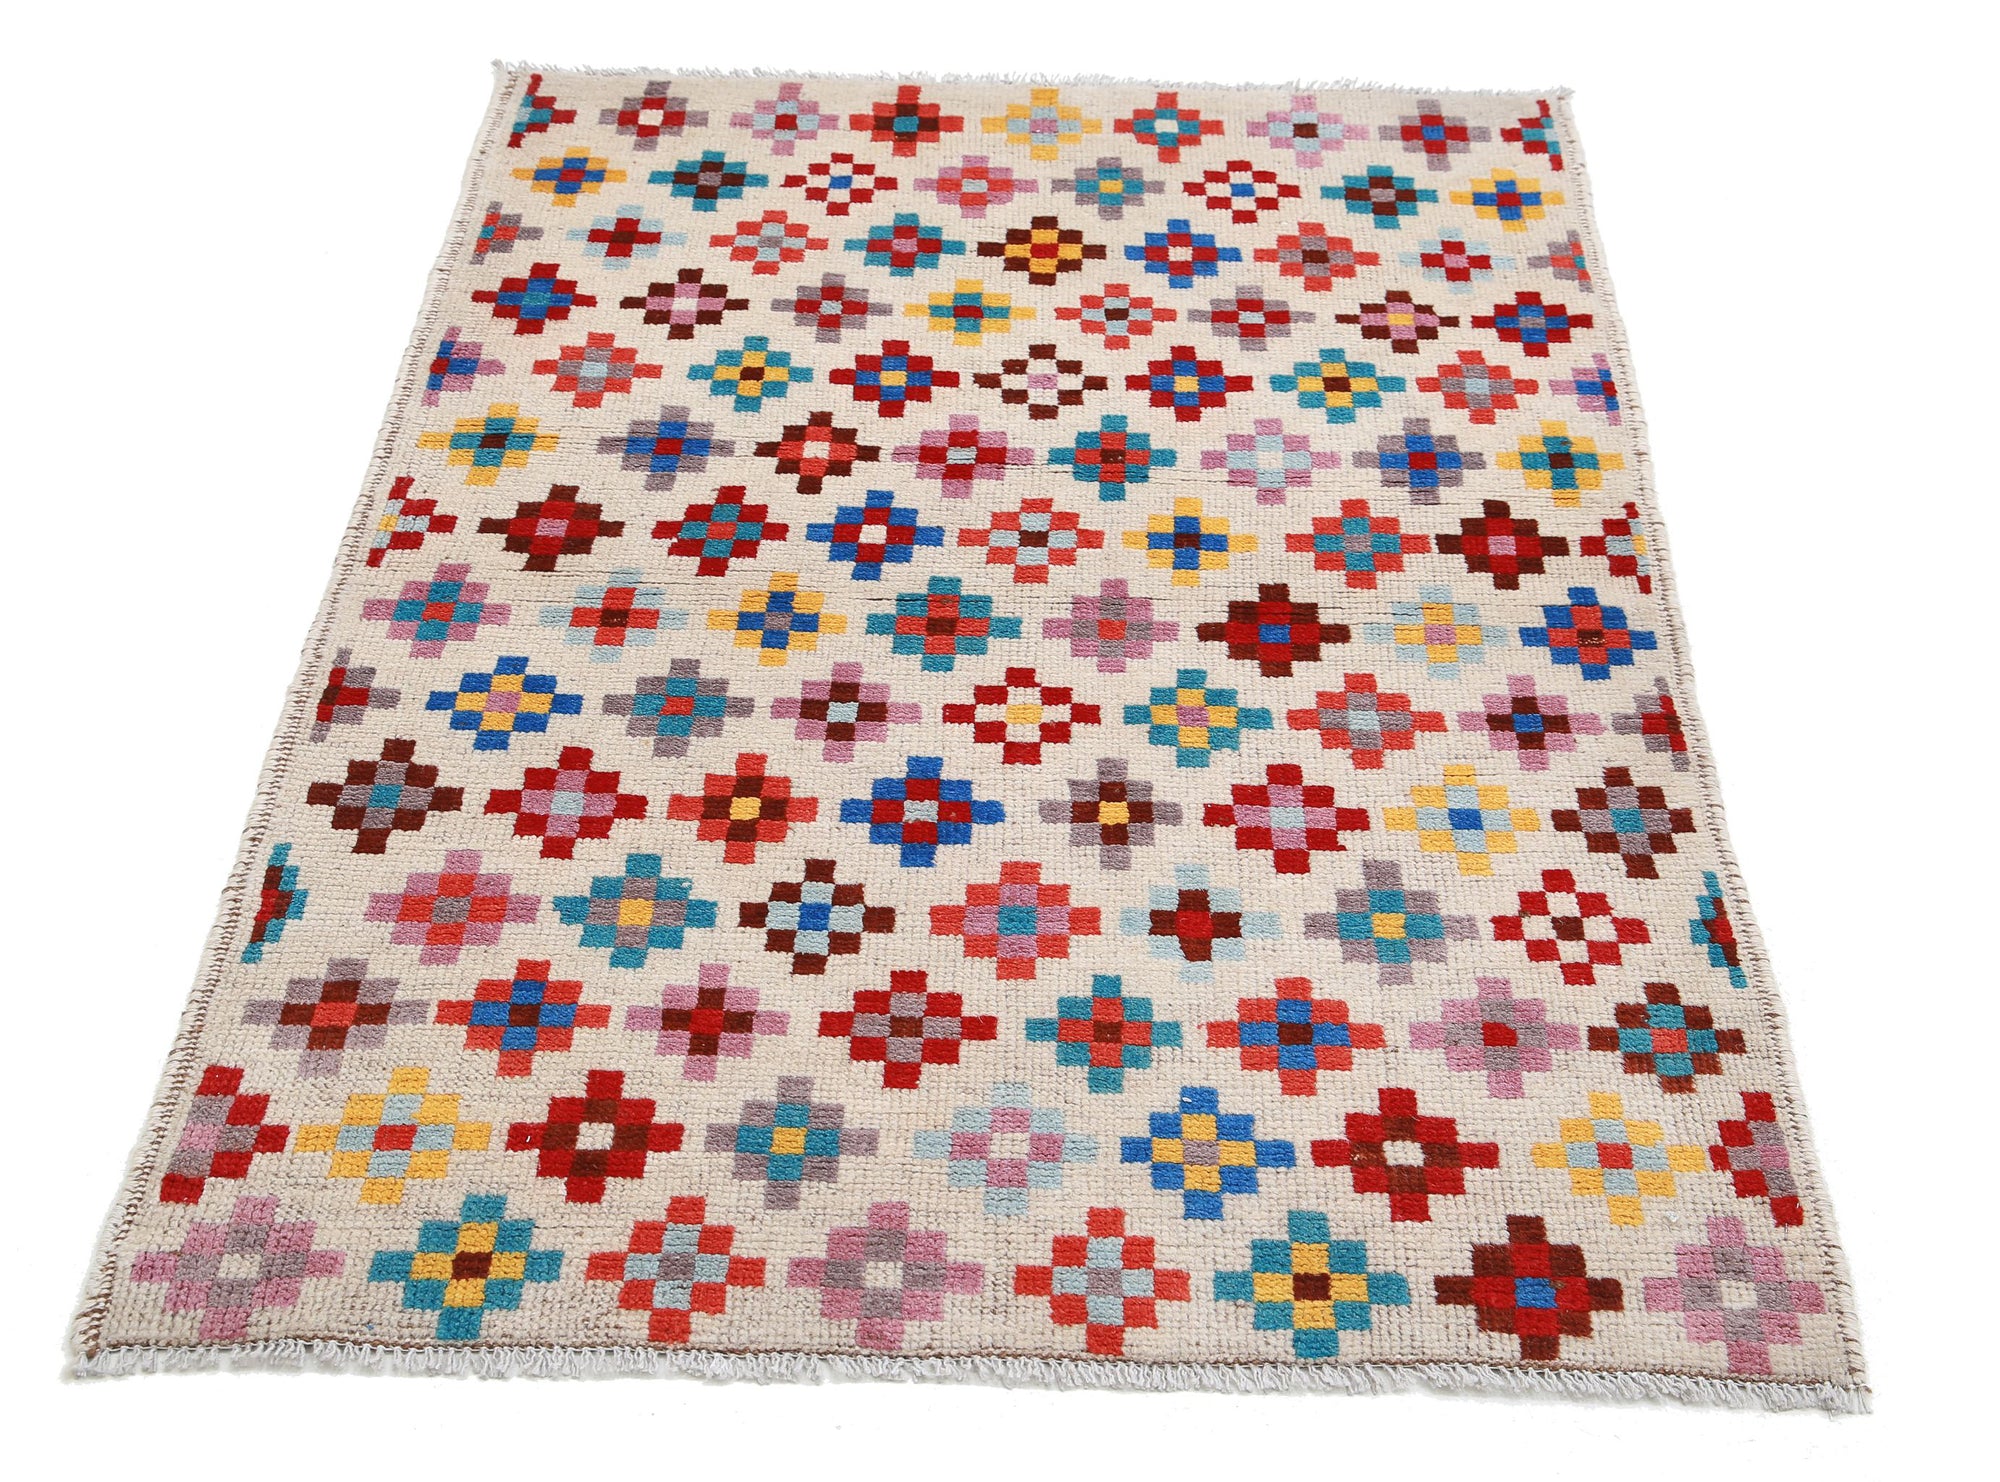 Revival-hand-knotted-qarghani-wool-rug-5014203-3.jpg